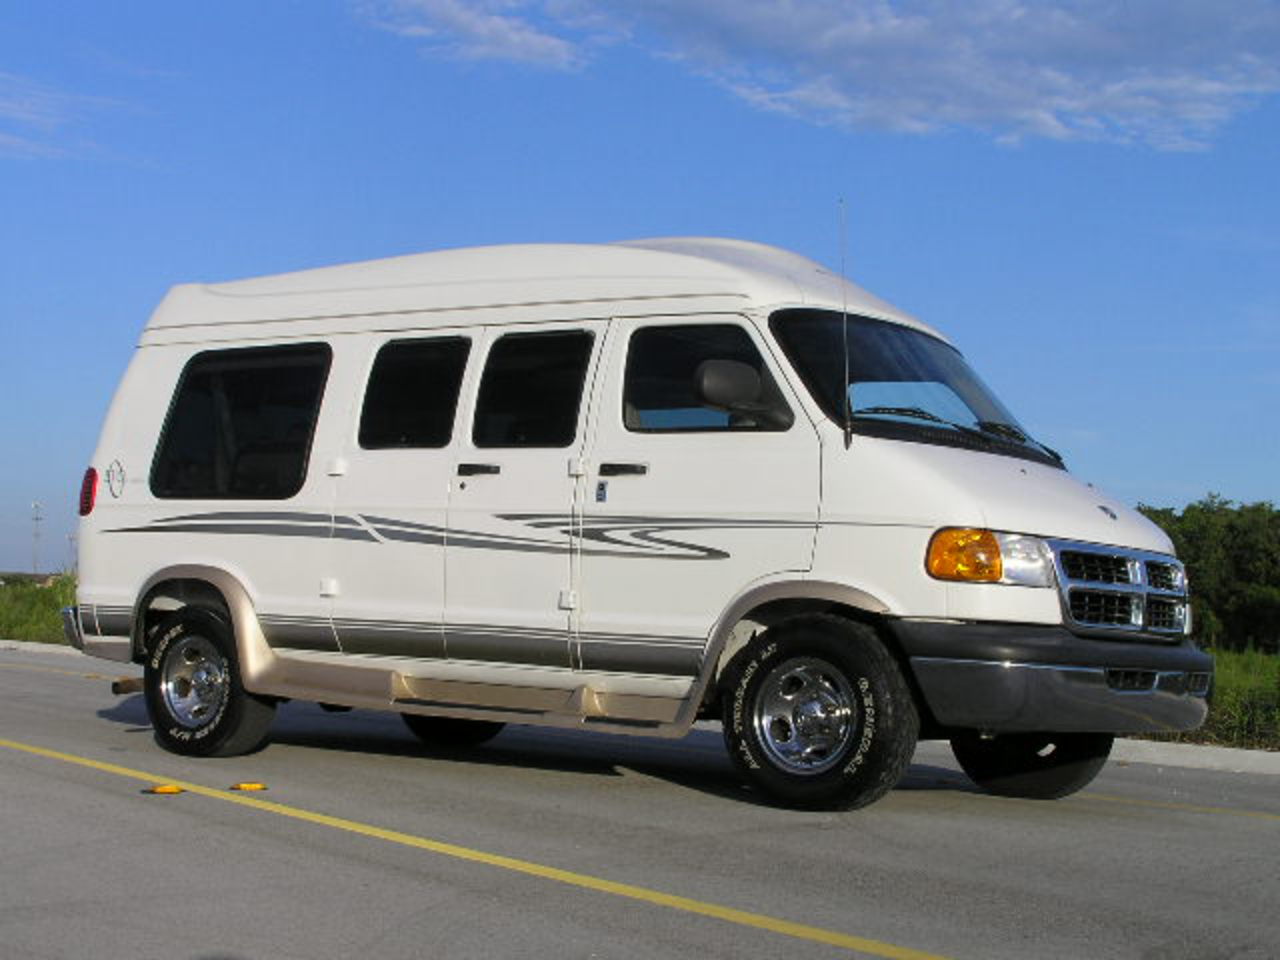 Do you want to learn more about the 2001 Dodge Ram Van 2500?